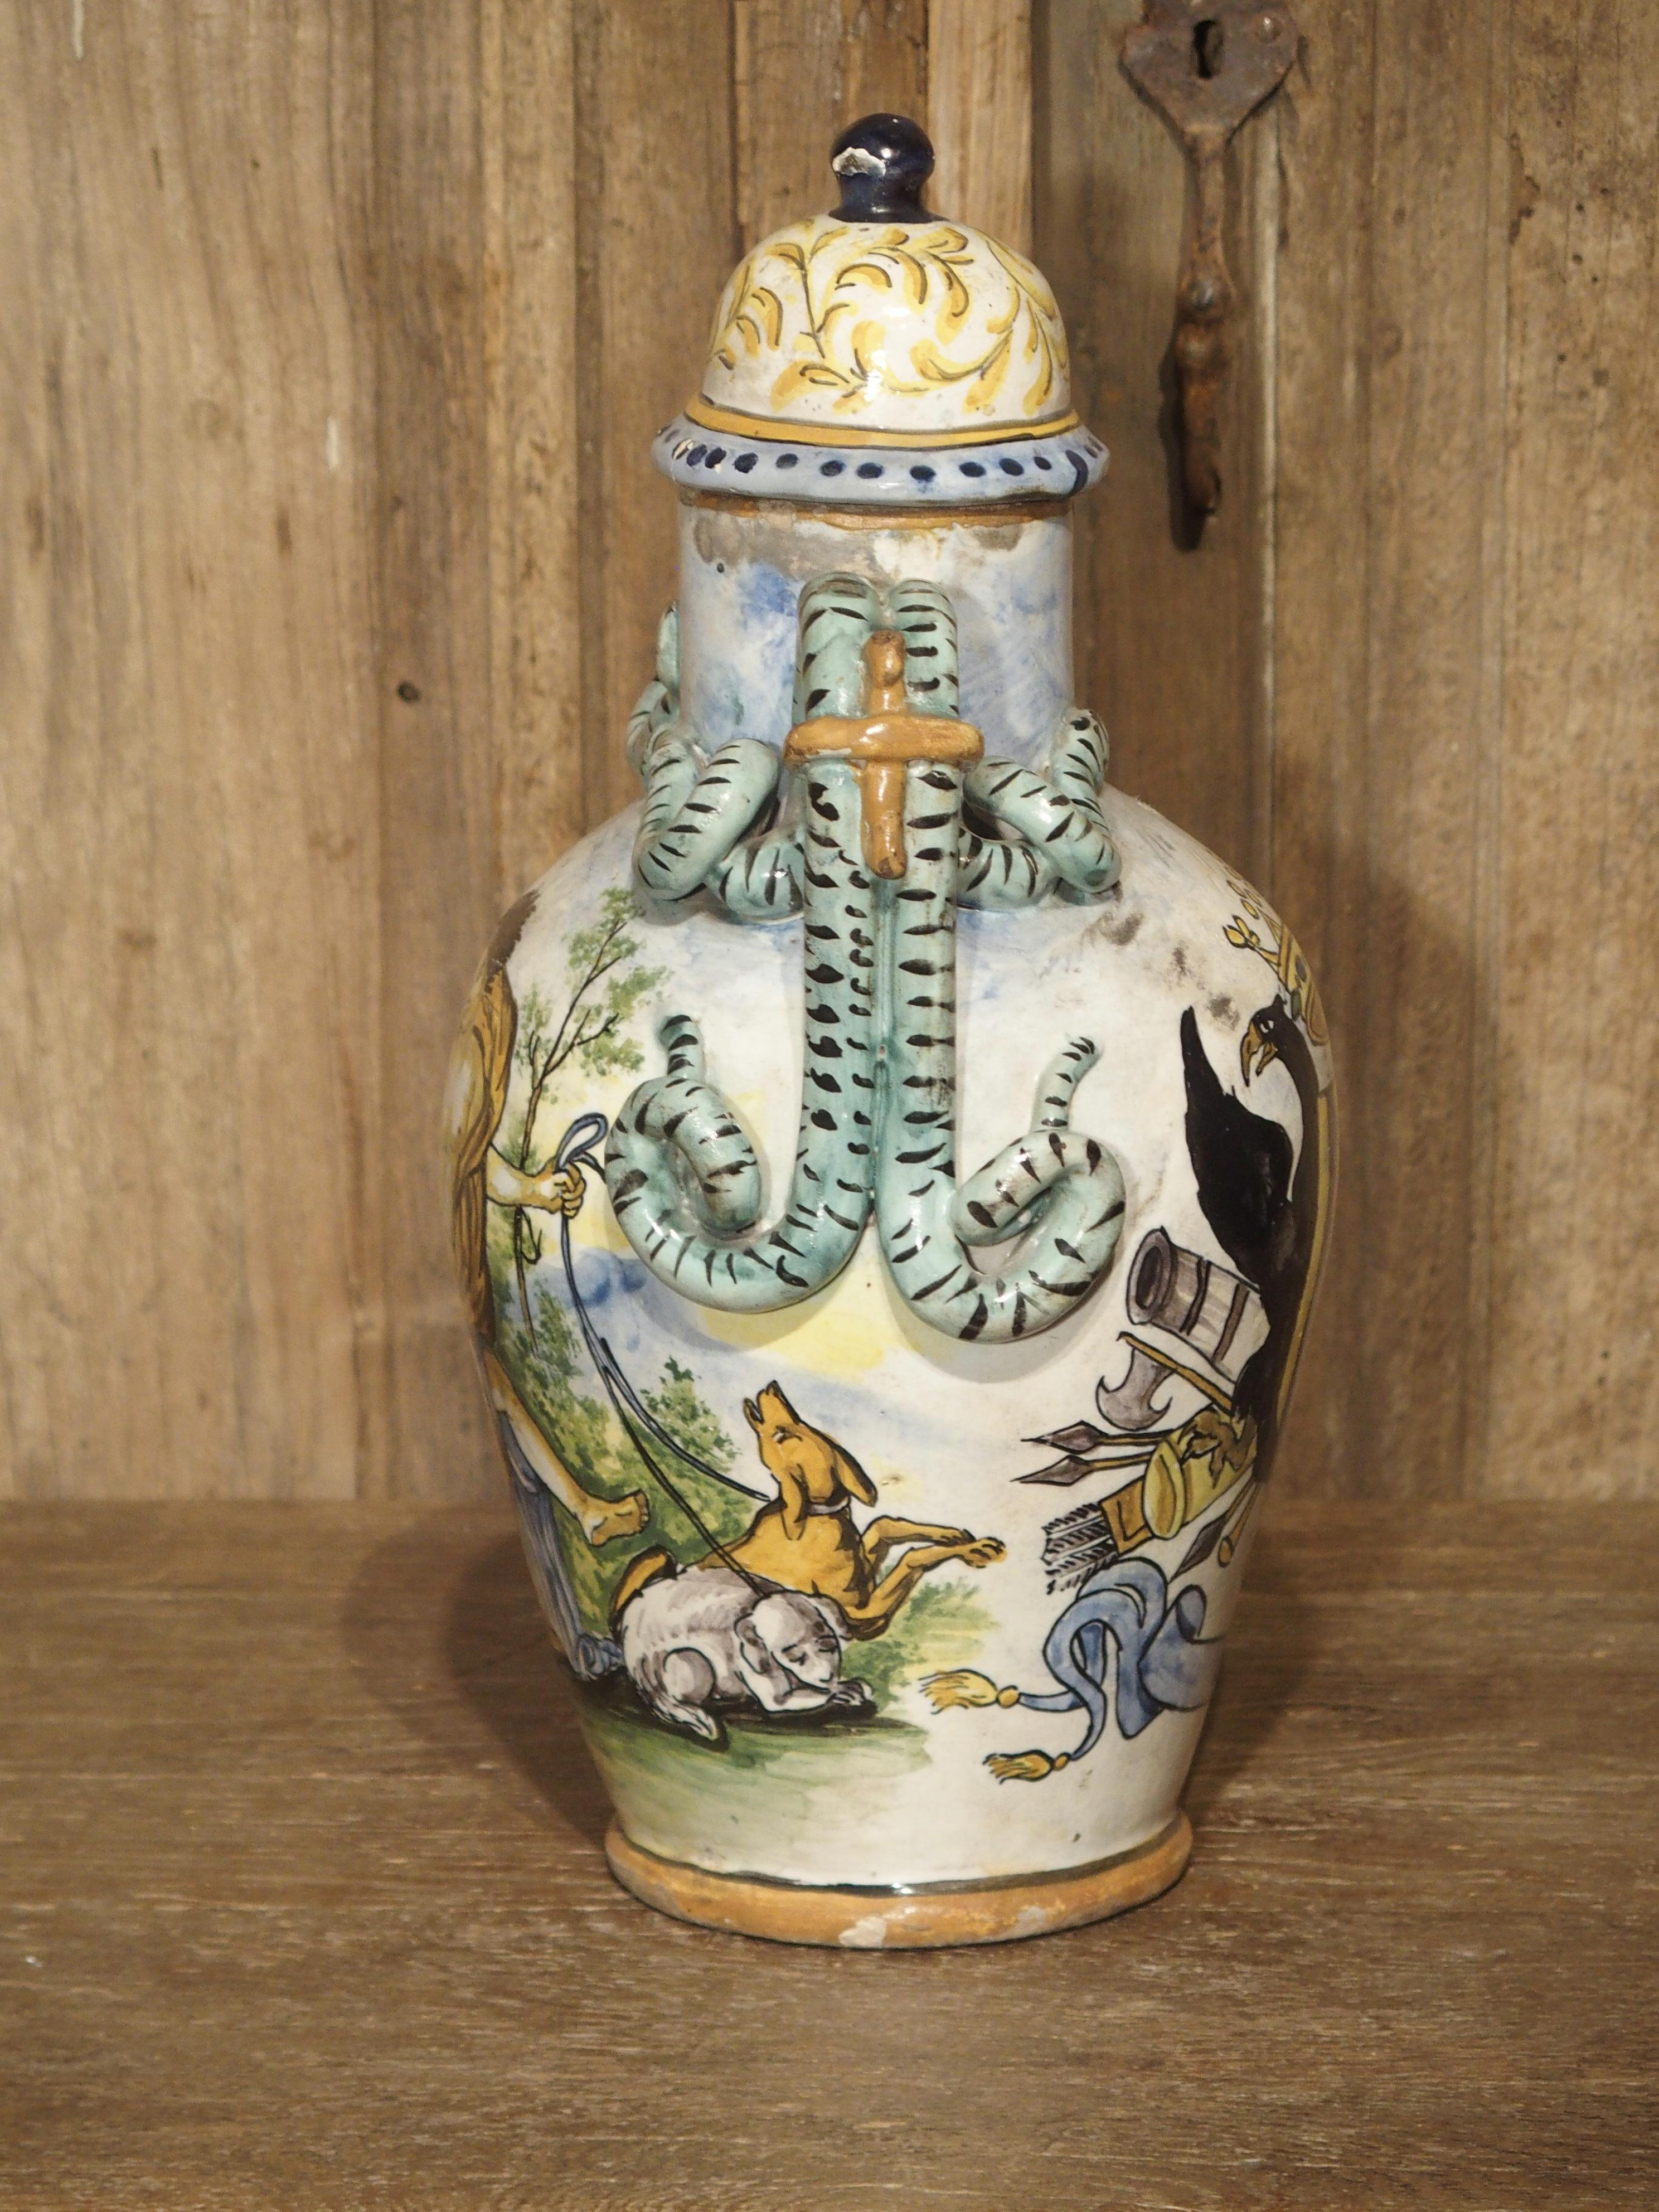 Antique Hand Painted Majolica Vase from Umbria, circa 1870 For Sale 4